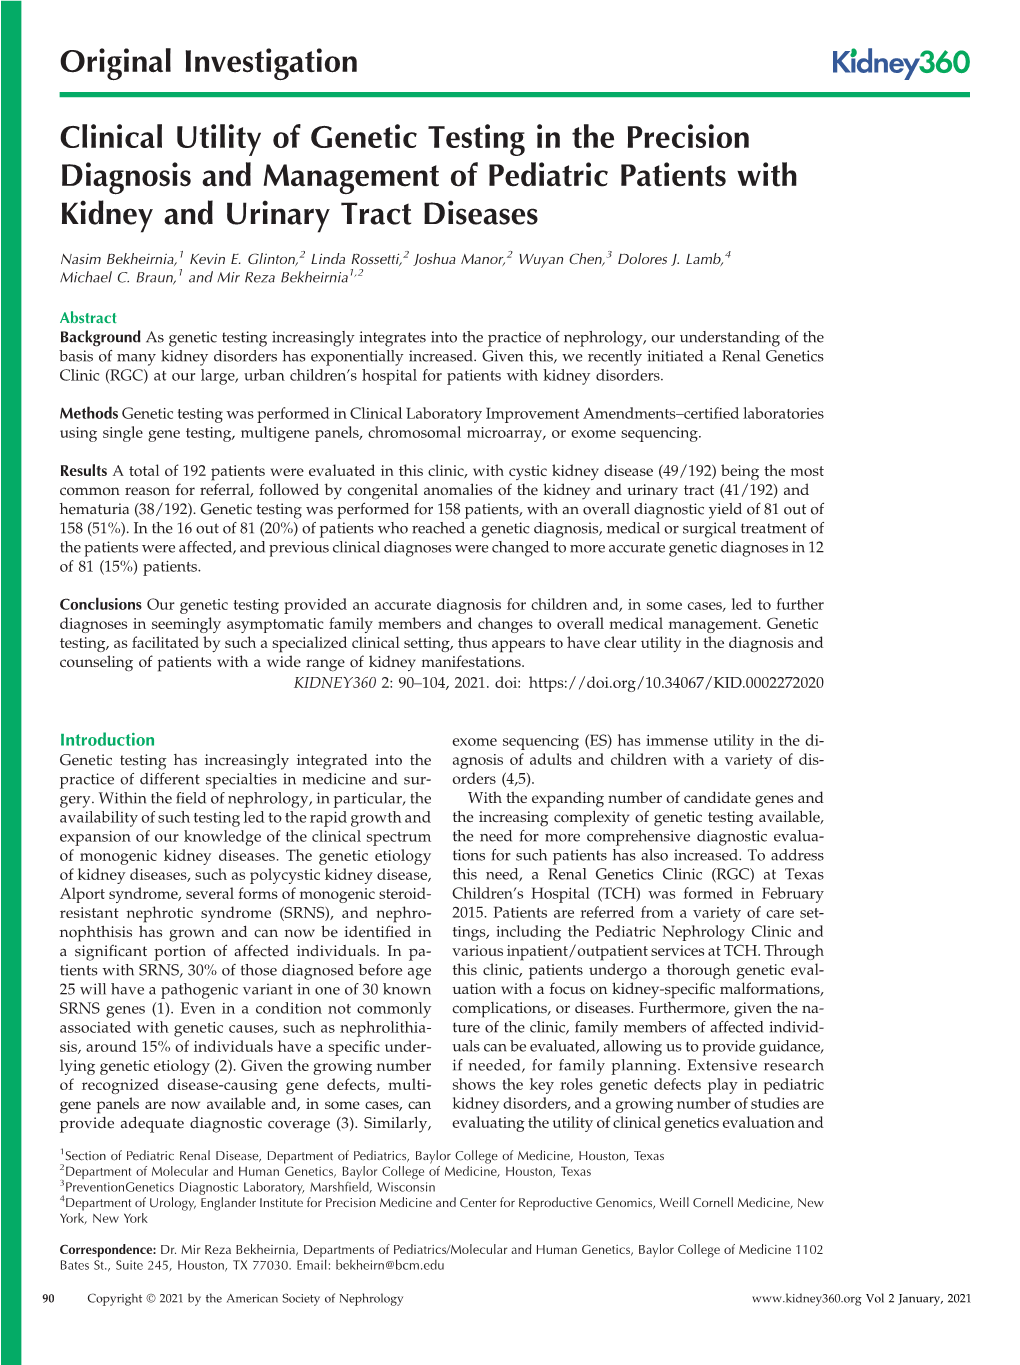 Clinical Utility of Genetic Testing in the Precision Diagnosis and Management of Pediatric Patients with Kidney and Urinary Tract Diseases